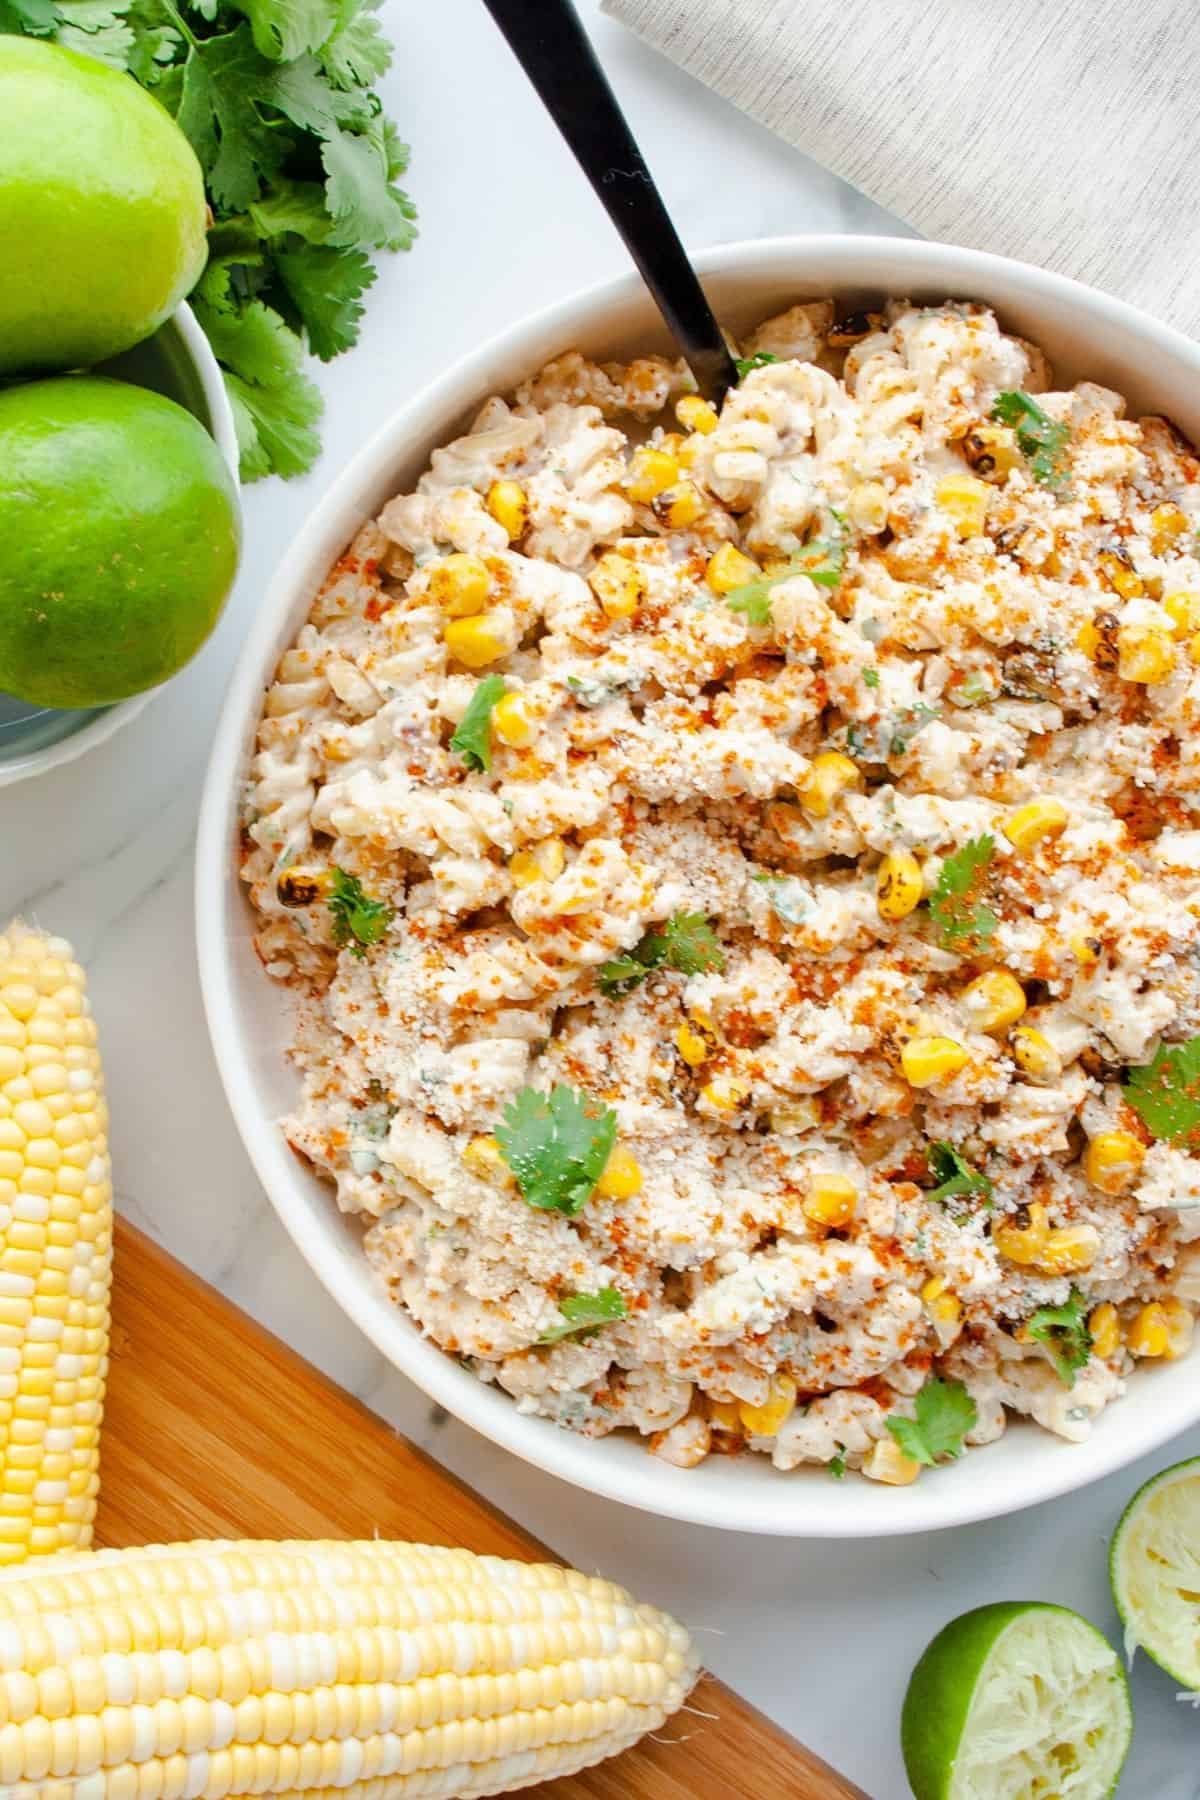 Street corn pasta salad in a serving bowl next to corn cobs, cilantro and limes.